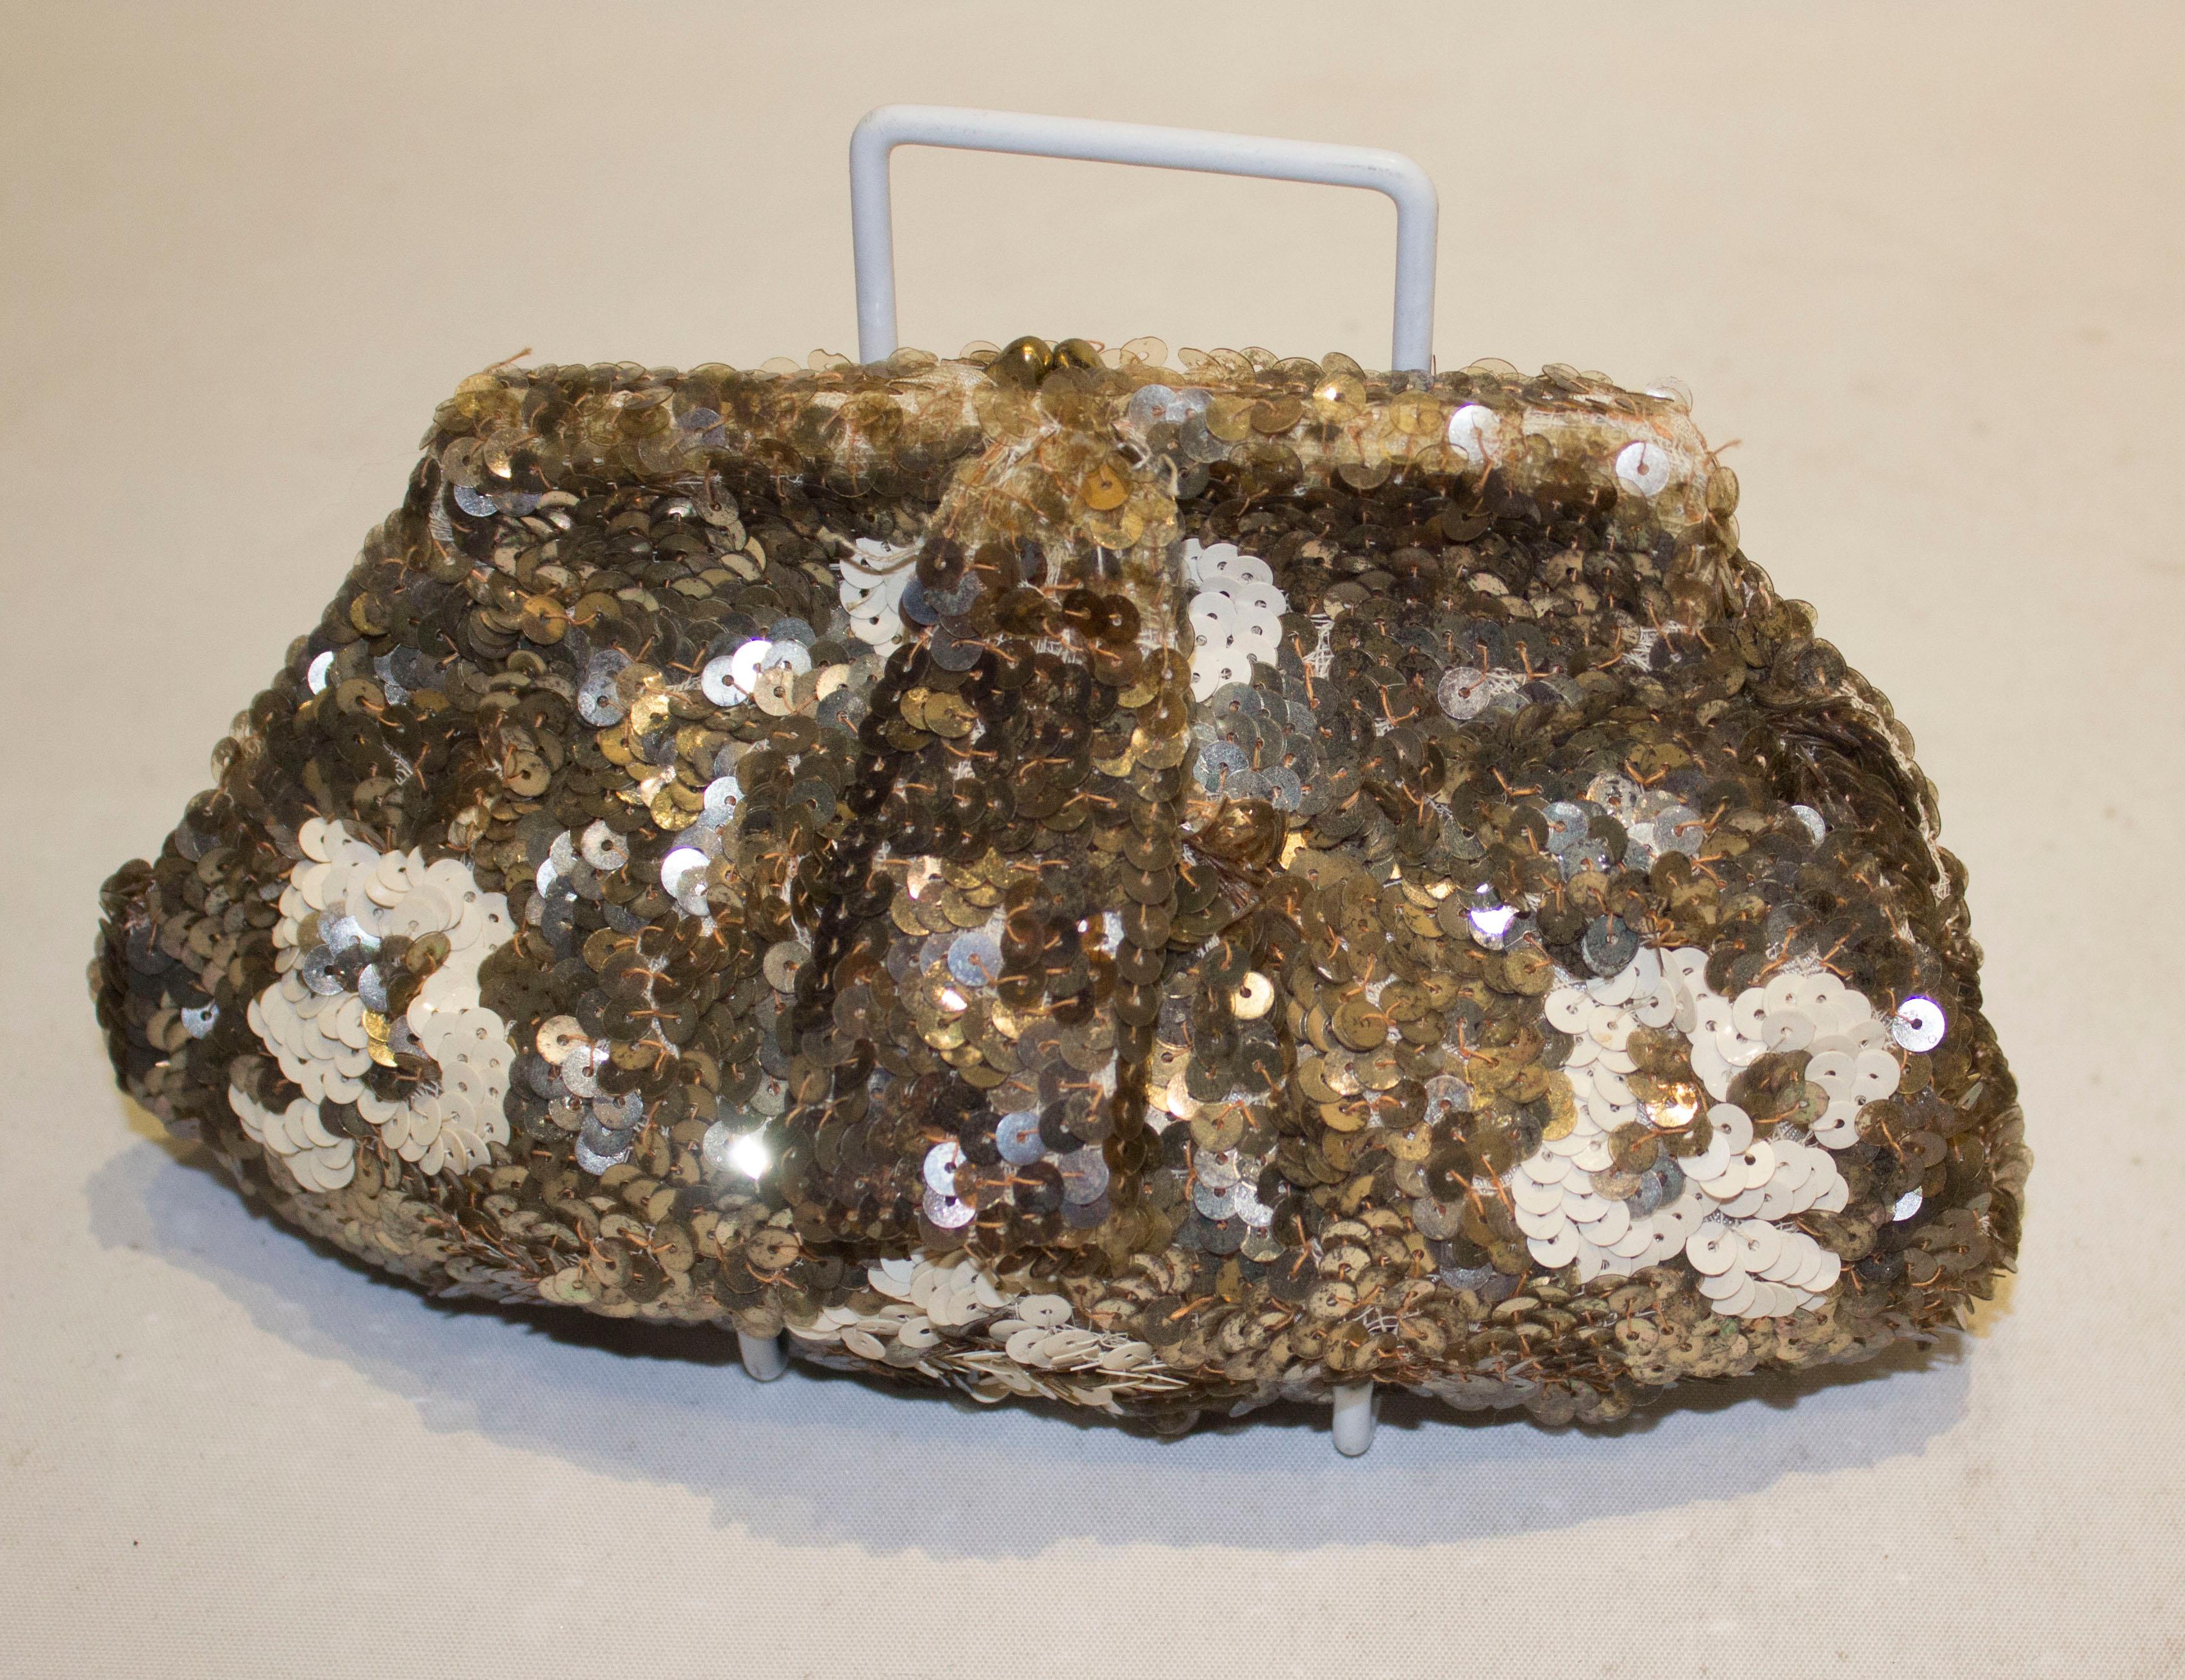 A great vintage sequin evening purse in gold, bronze and cream. The purse is lined in satin with one pouch pocket. Measurements: width 8'', height 5''